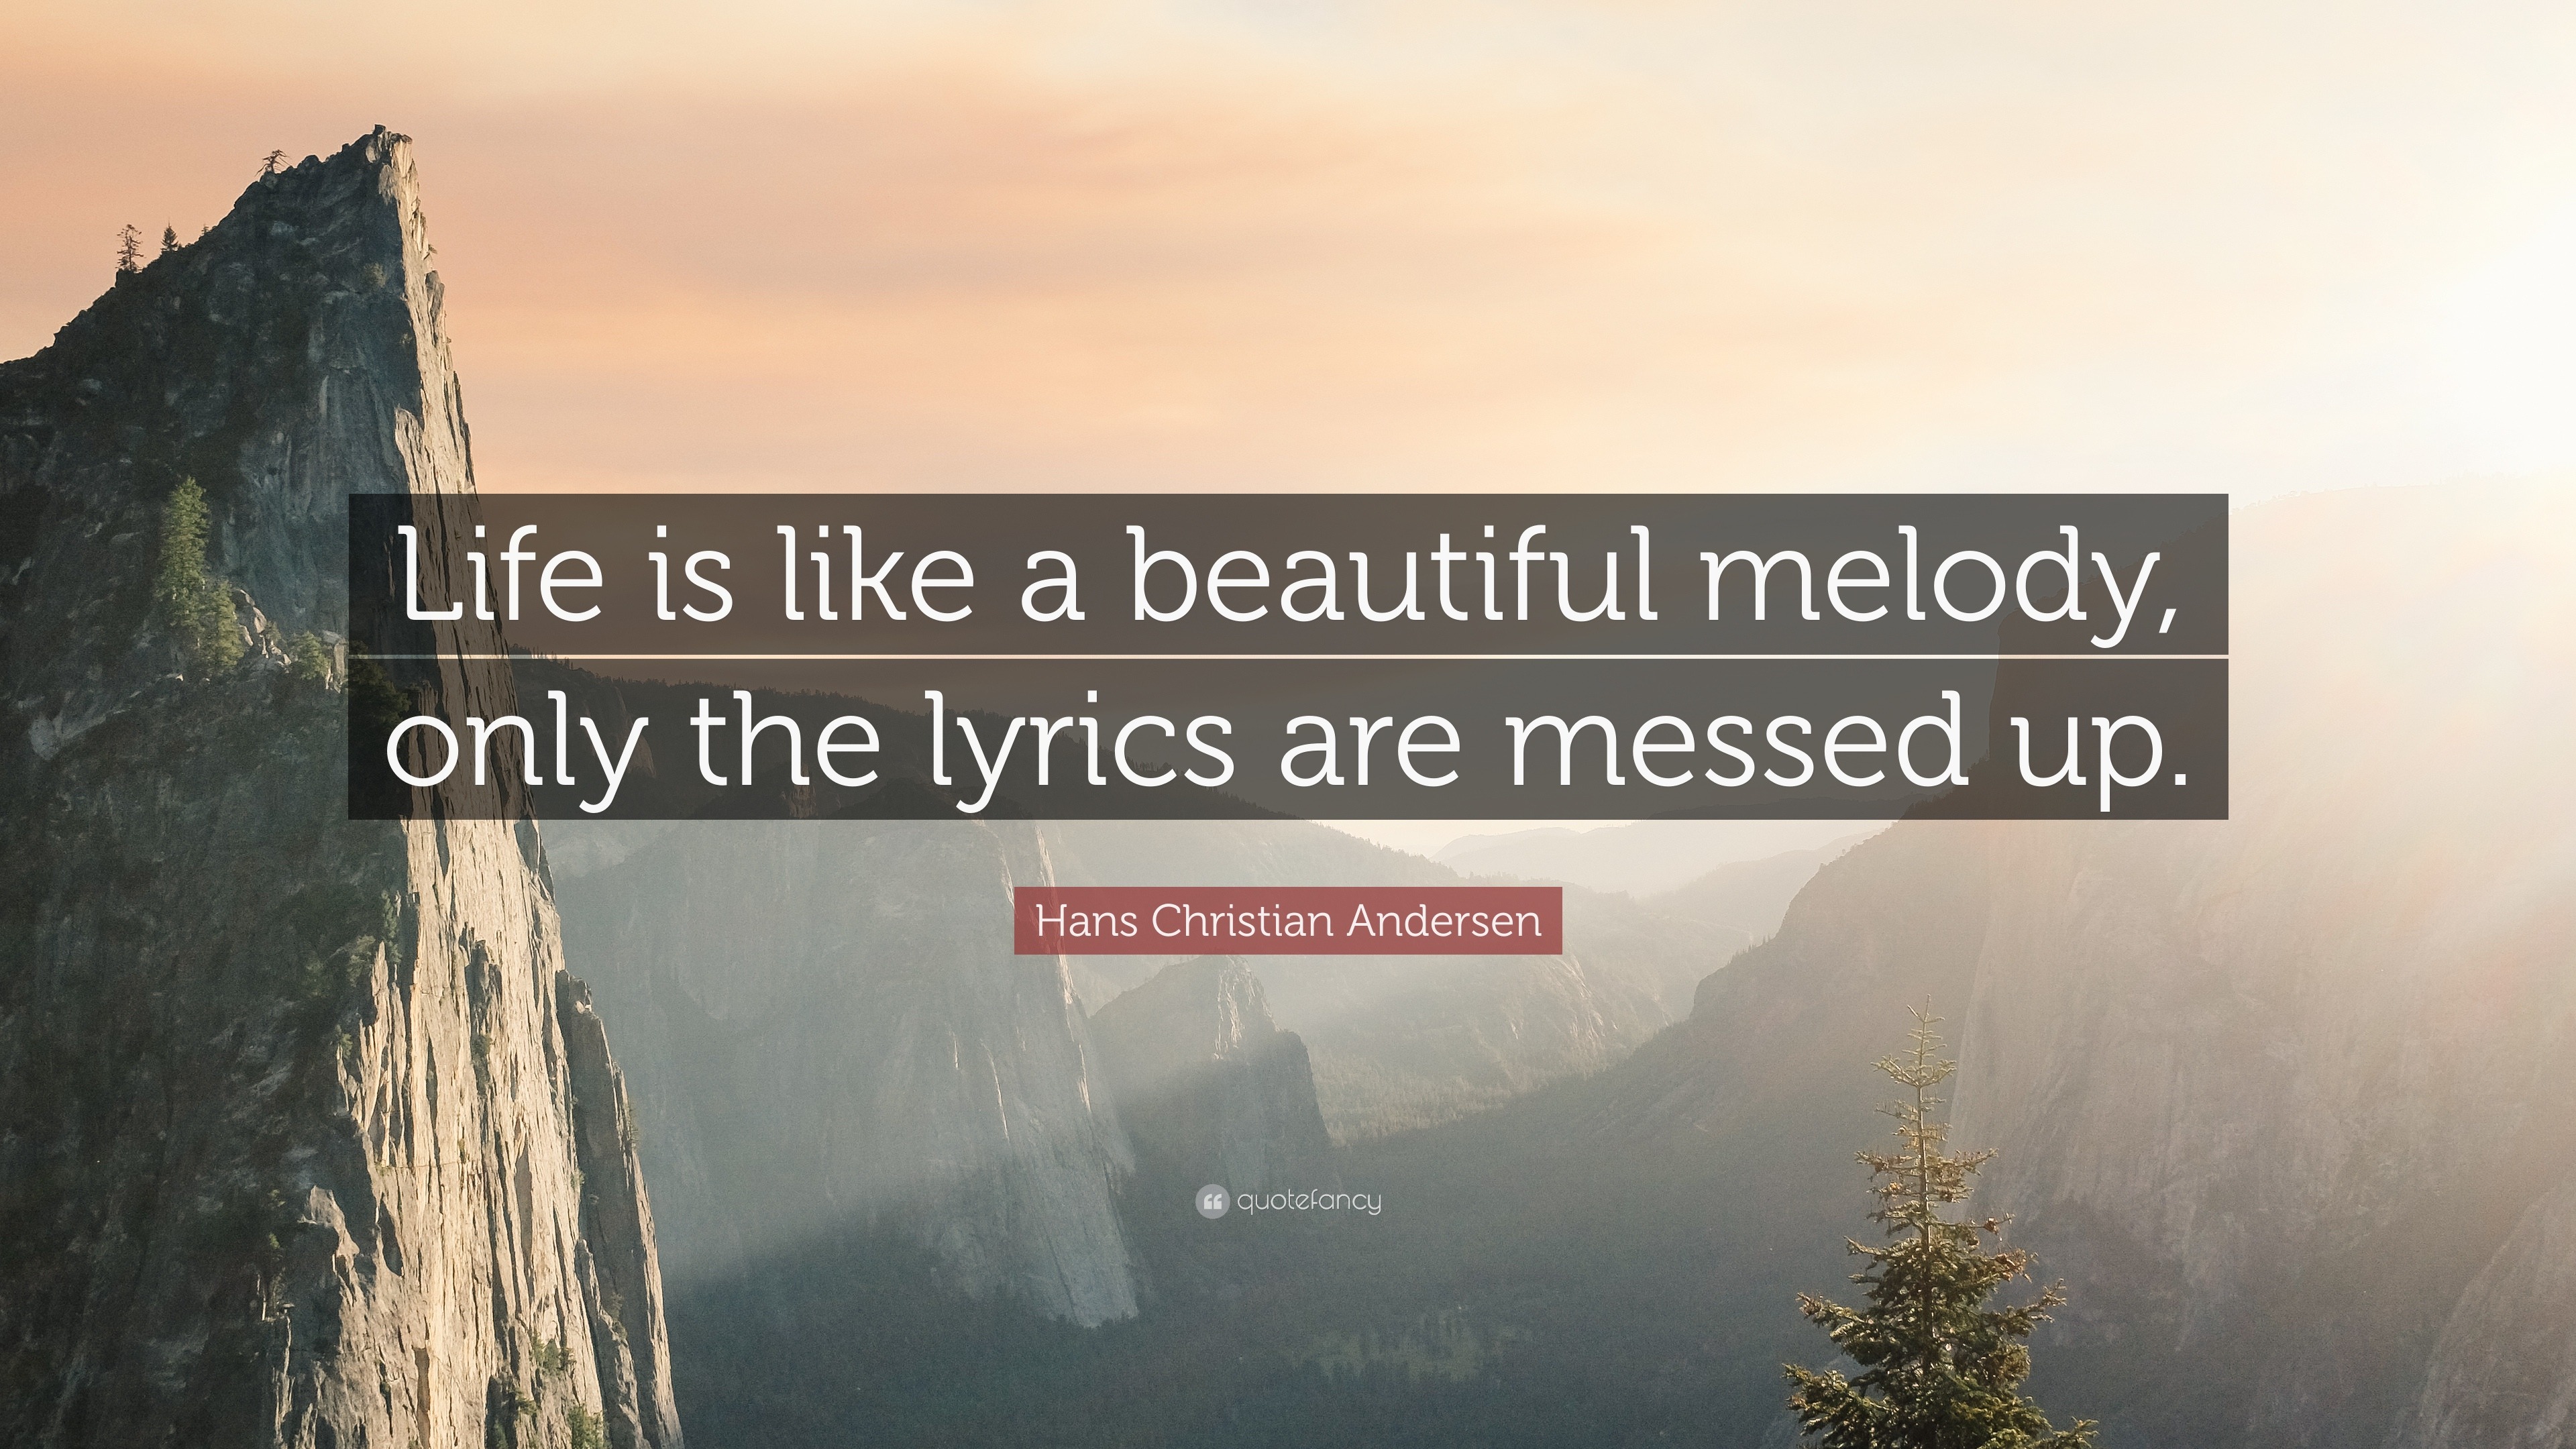 Hans Christian Andersen Quote Life Is Like A Beautiful Melody Only The Lyrics Are Messed Up